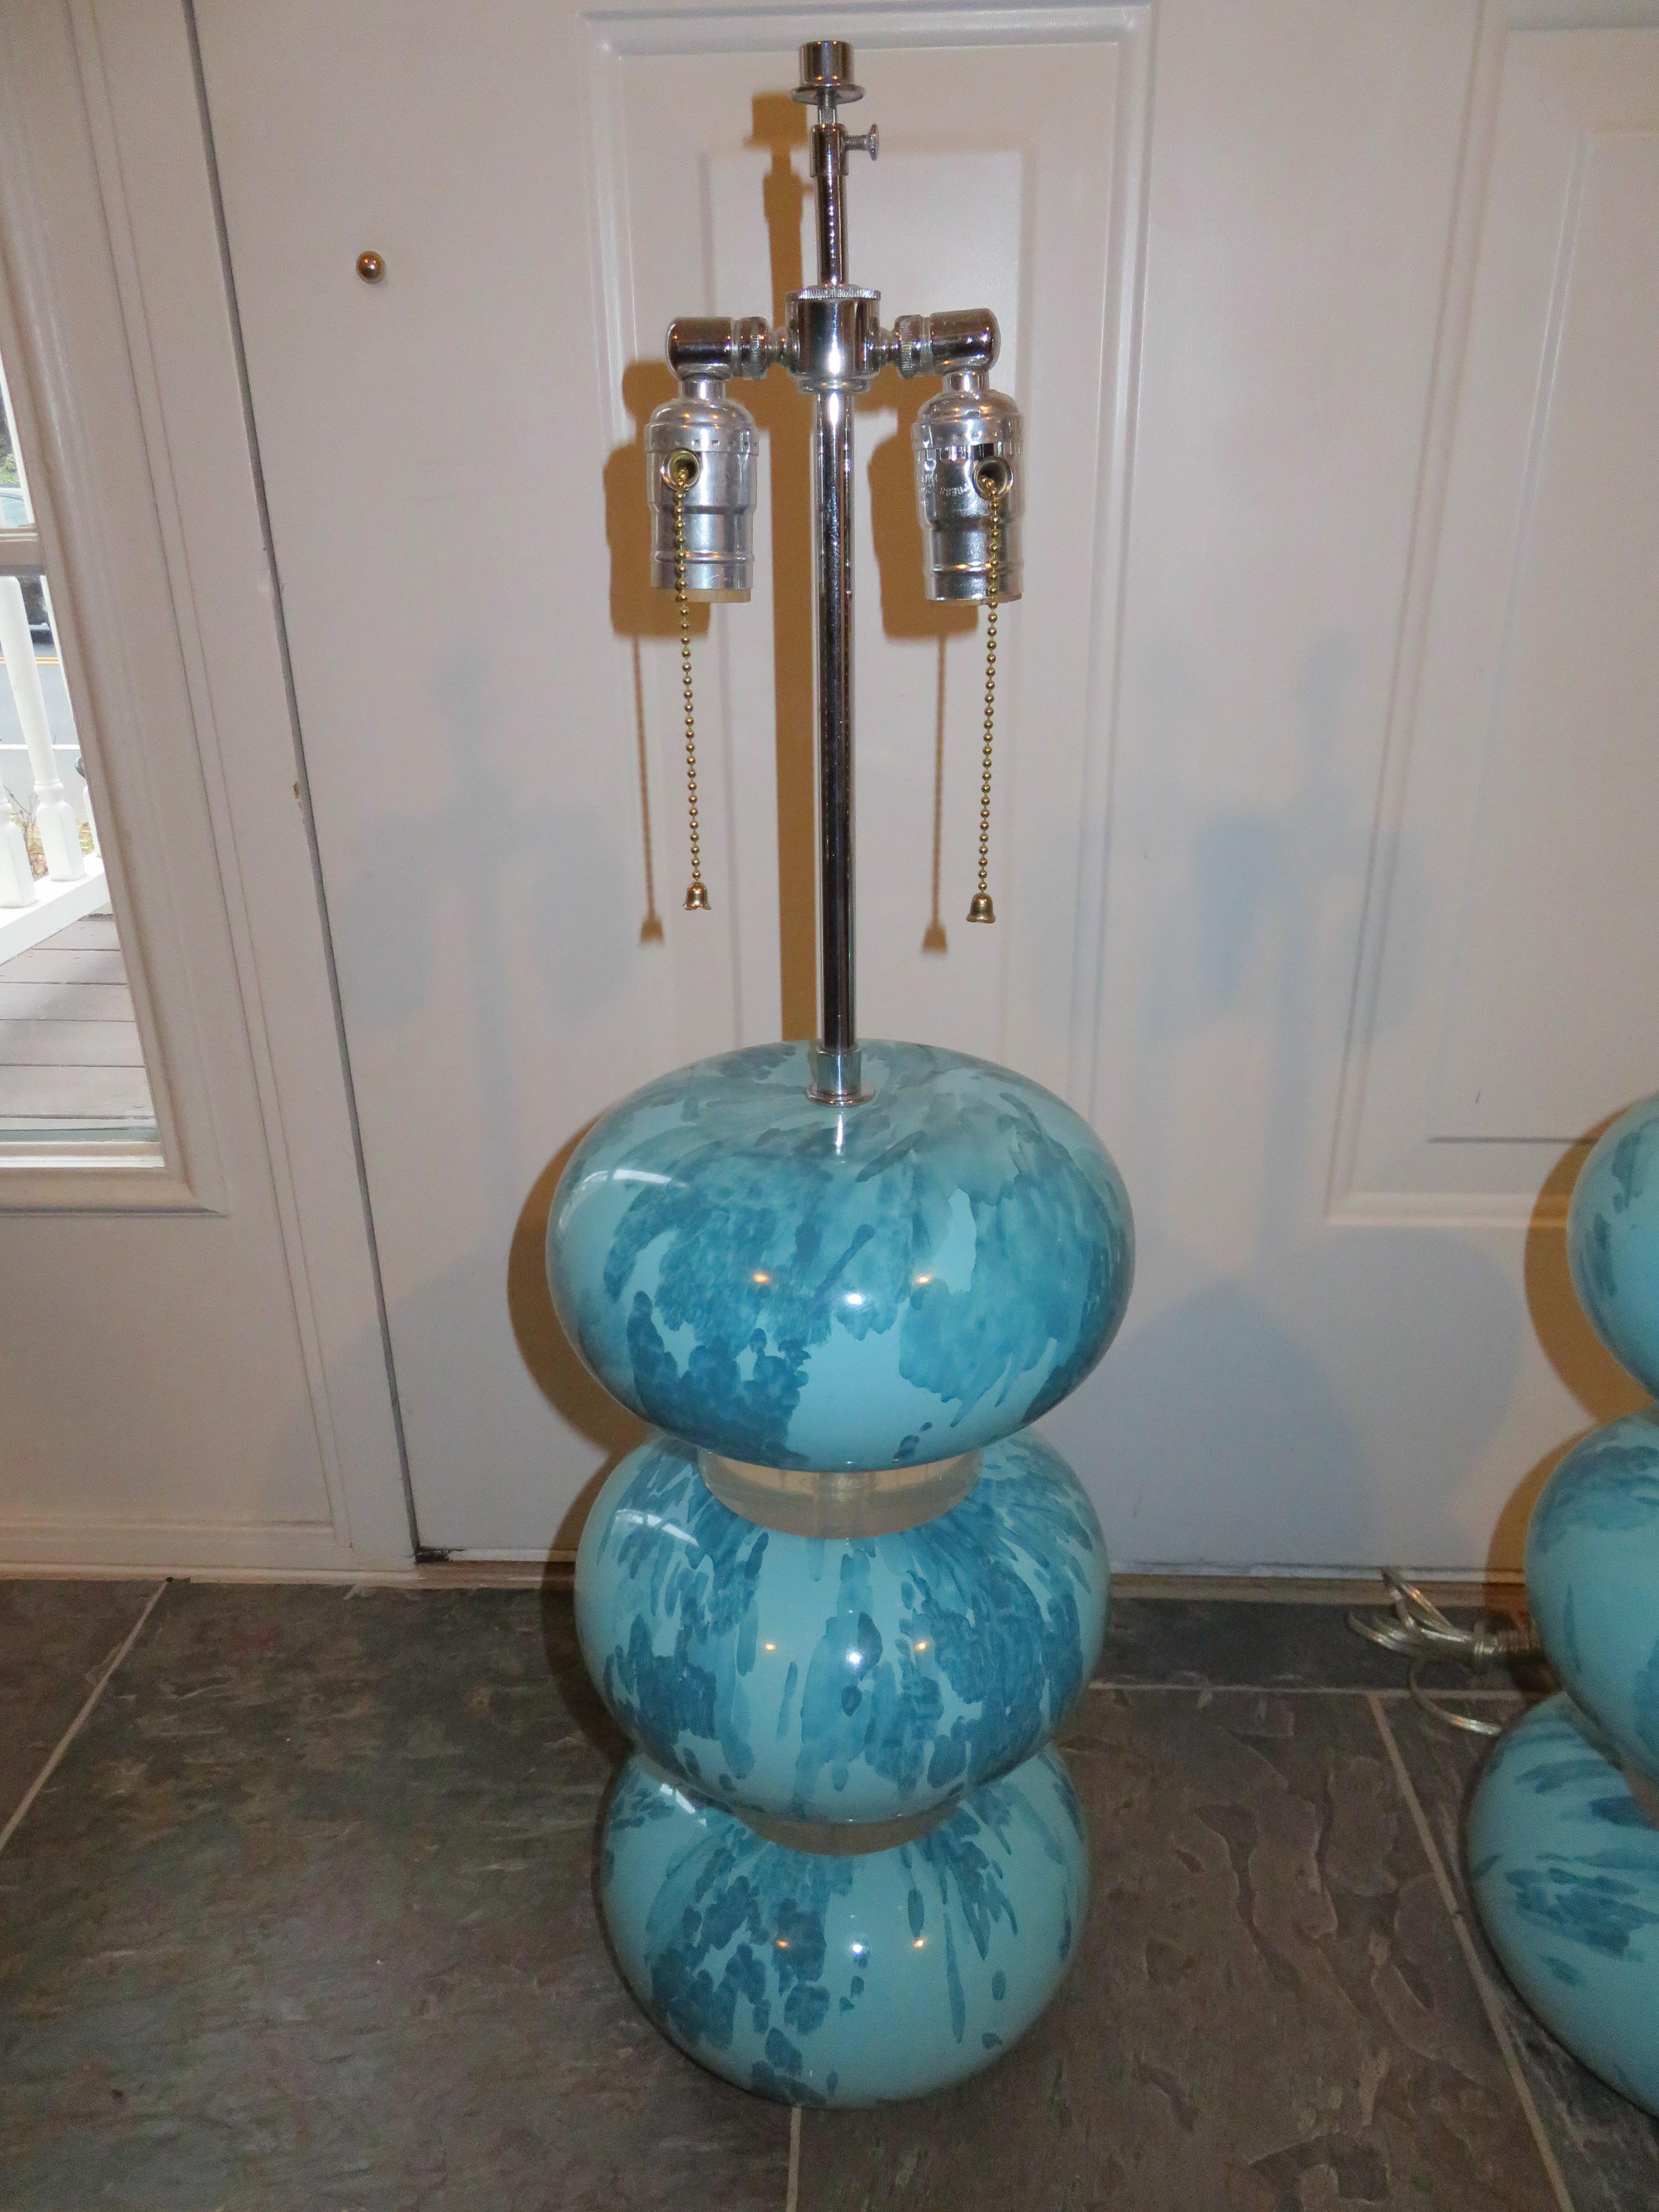 Magnificent and rare pair of Karl Springer marbleized blue lacquer and Lucite bubble table lamps, USA, 1970s. Retains Springer's original marbleized blue lacquered finish over three rounded plaster compressed spheres separated by two Lucite spacers.